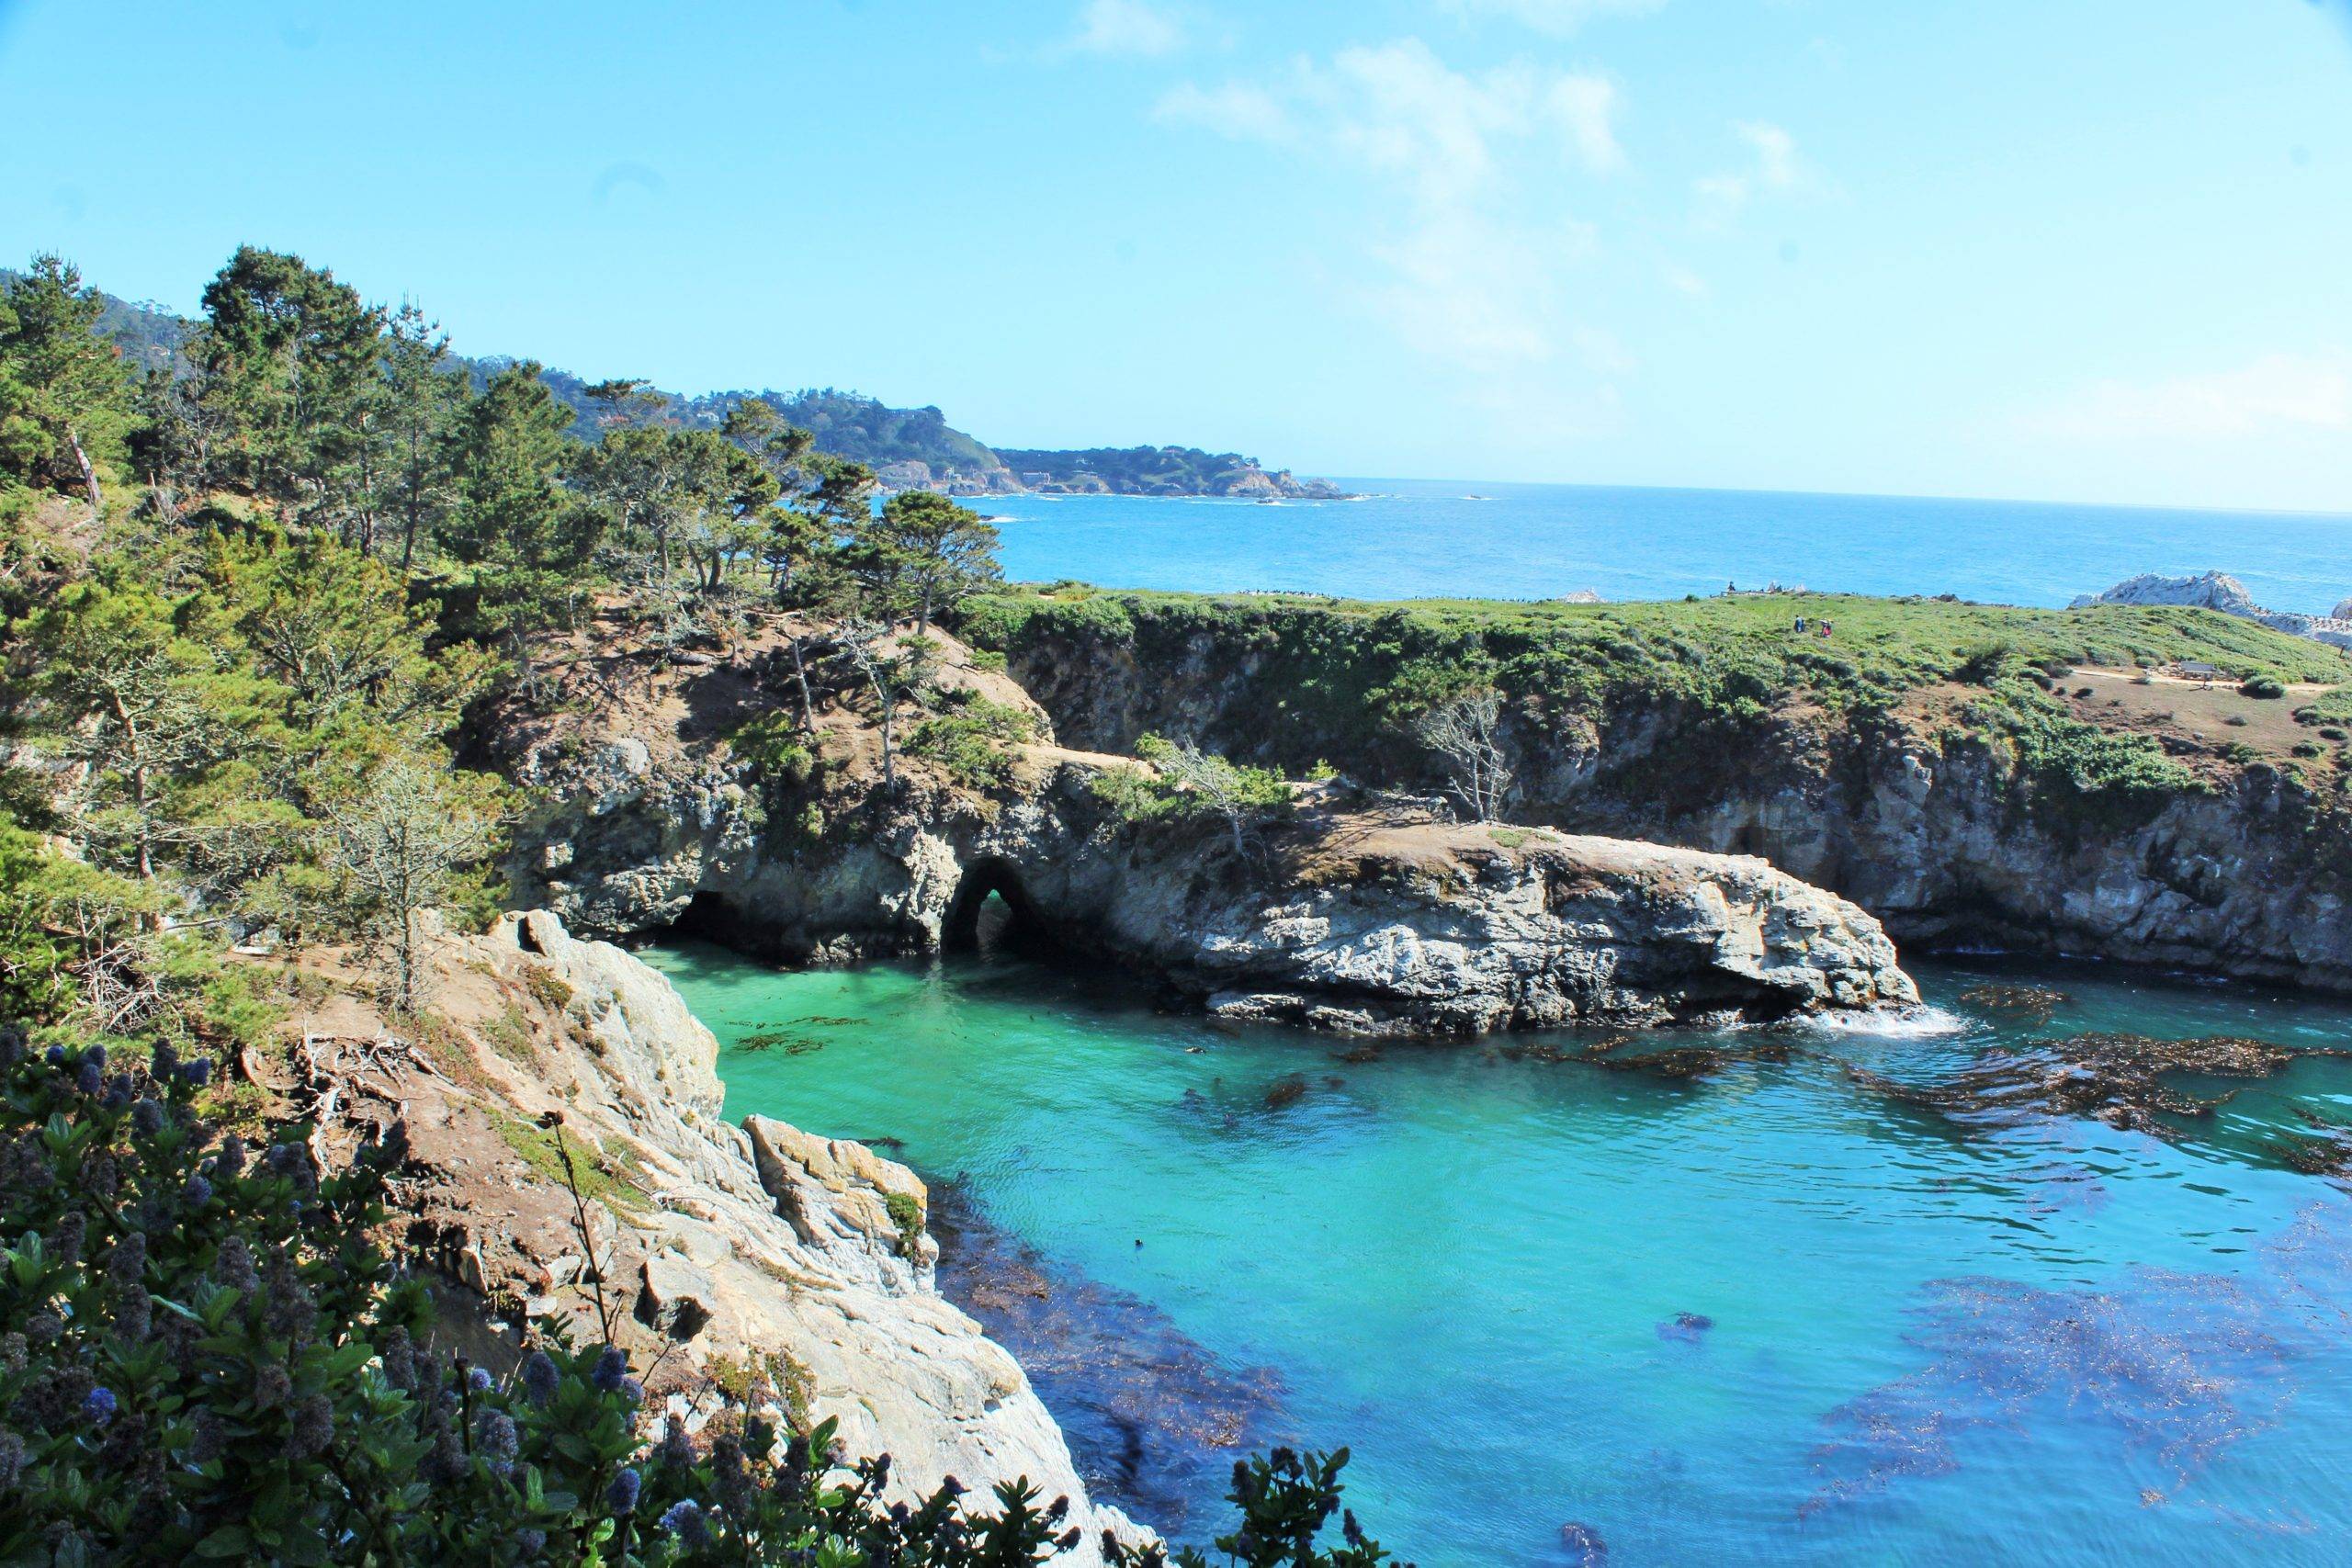 China Cove at Point Lobos State Reserve